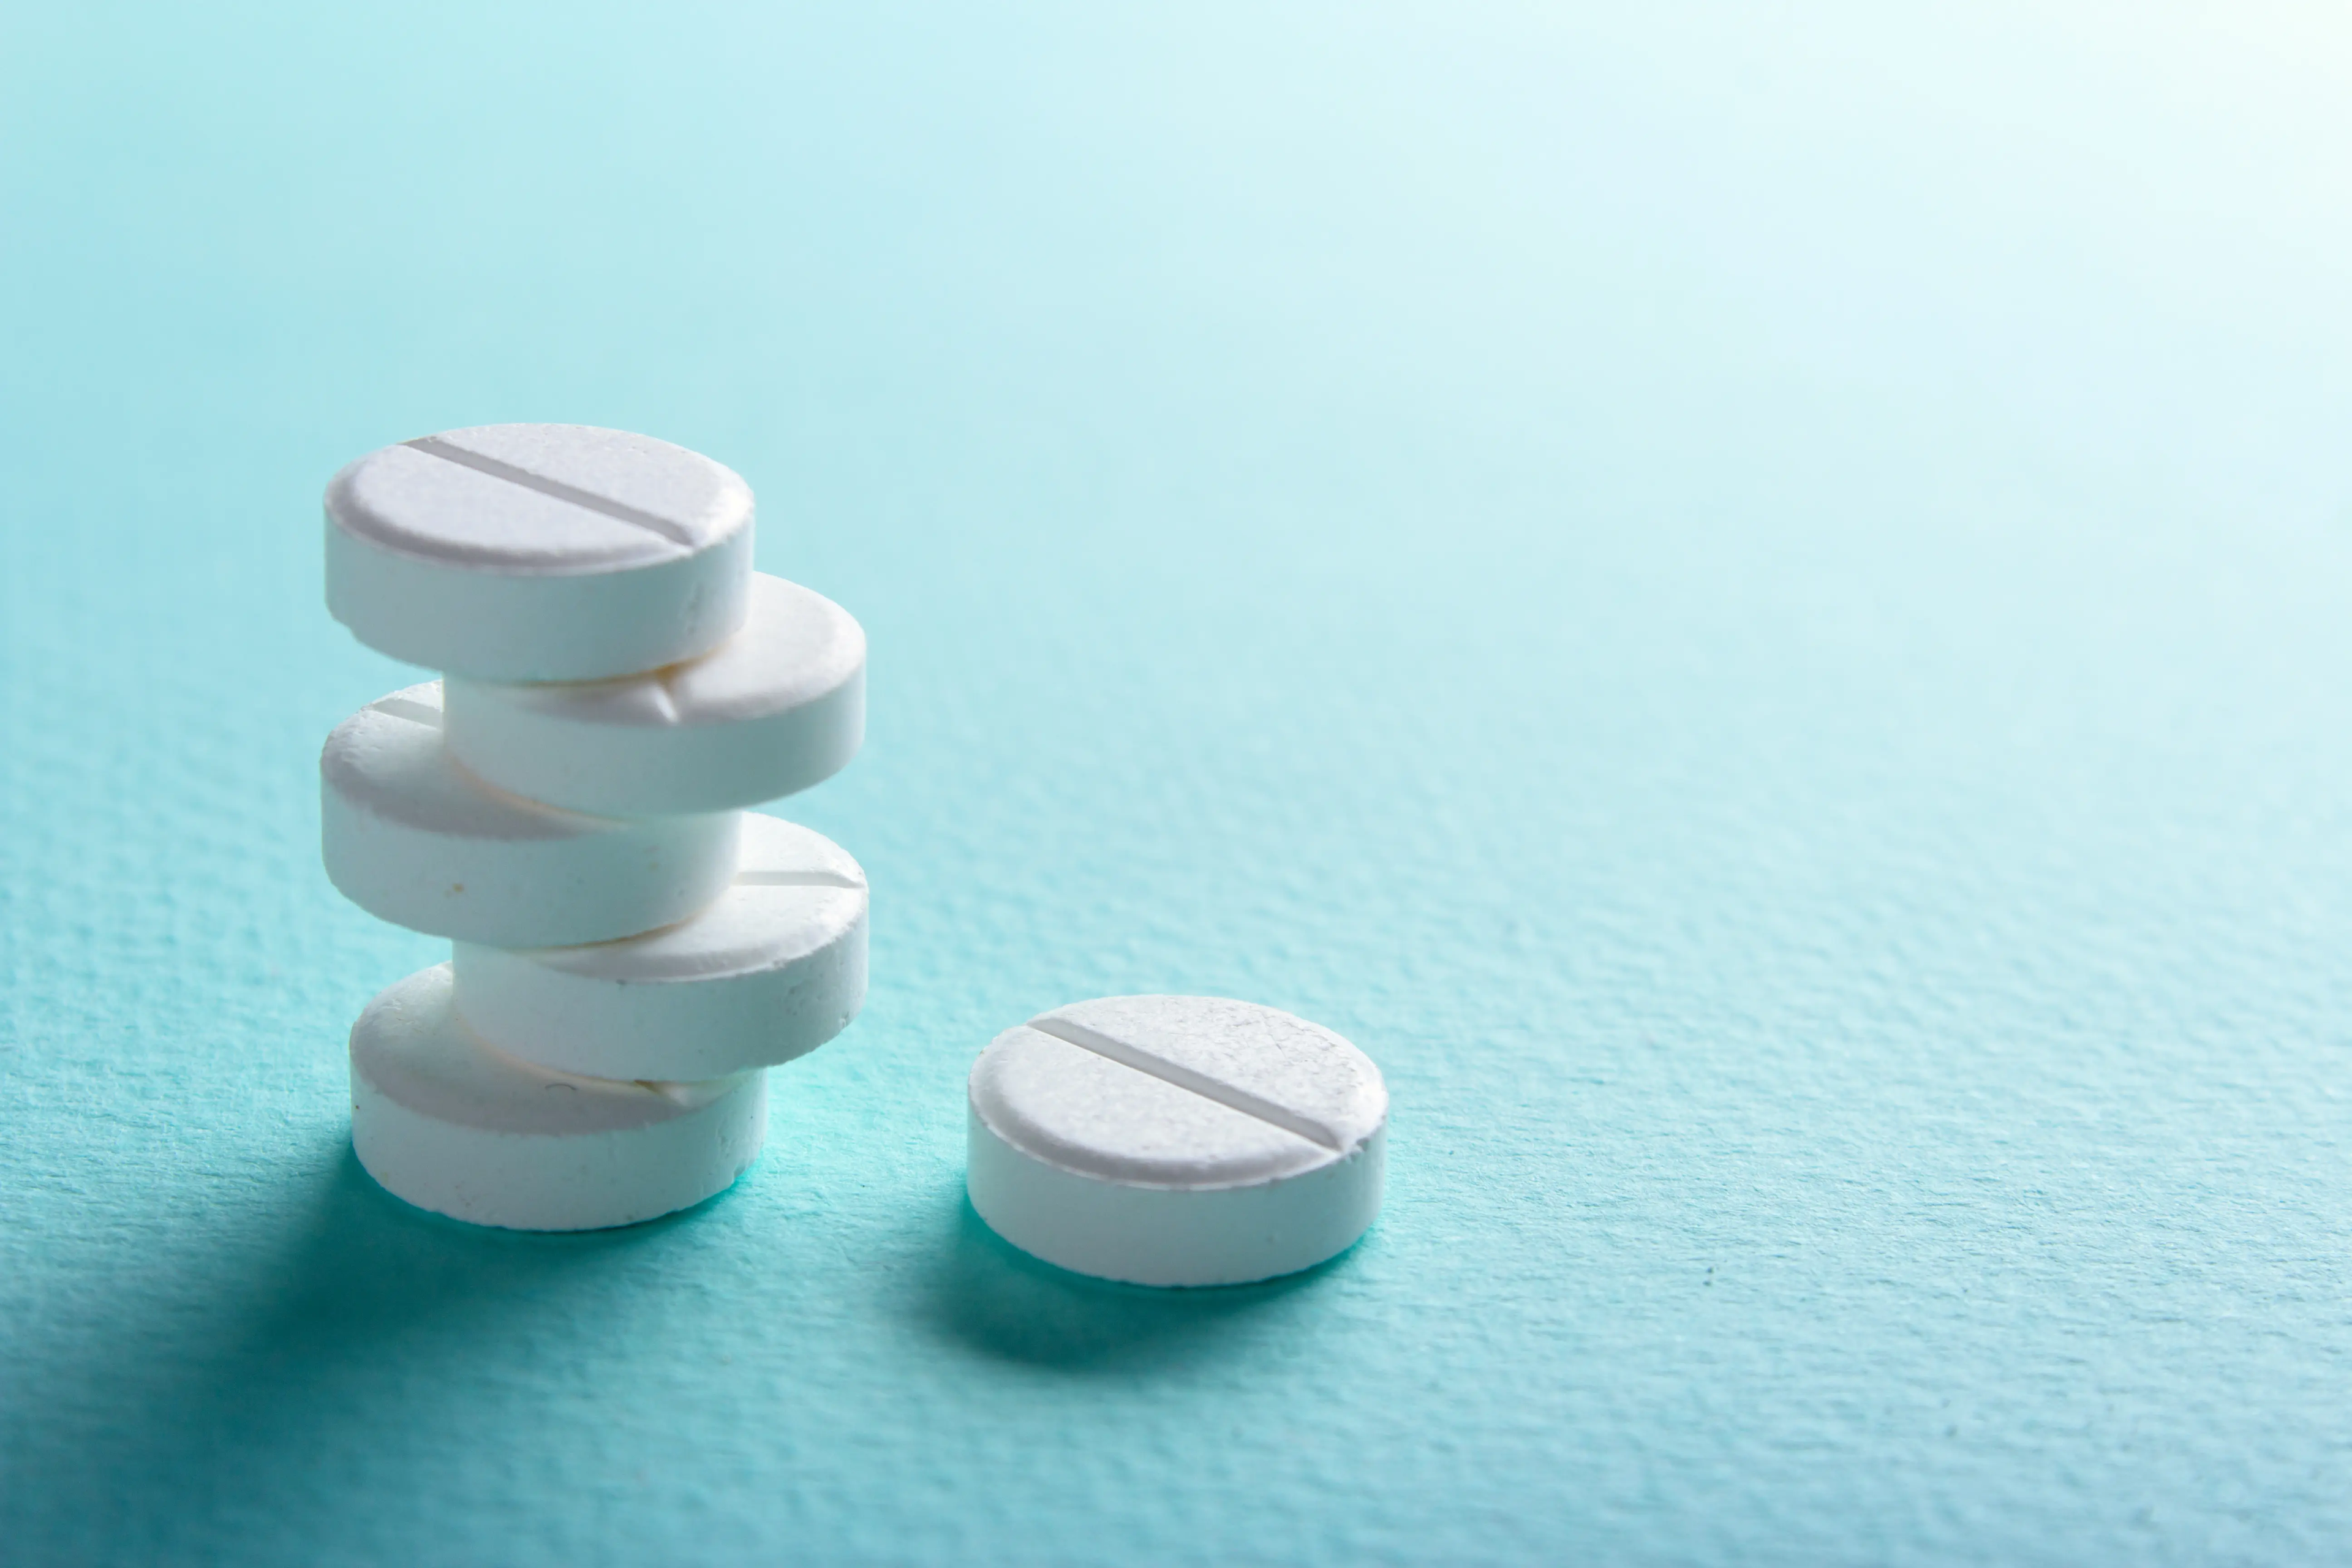 Patients Should Use Caution When Taking Aspirin